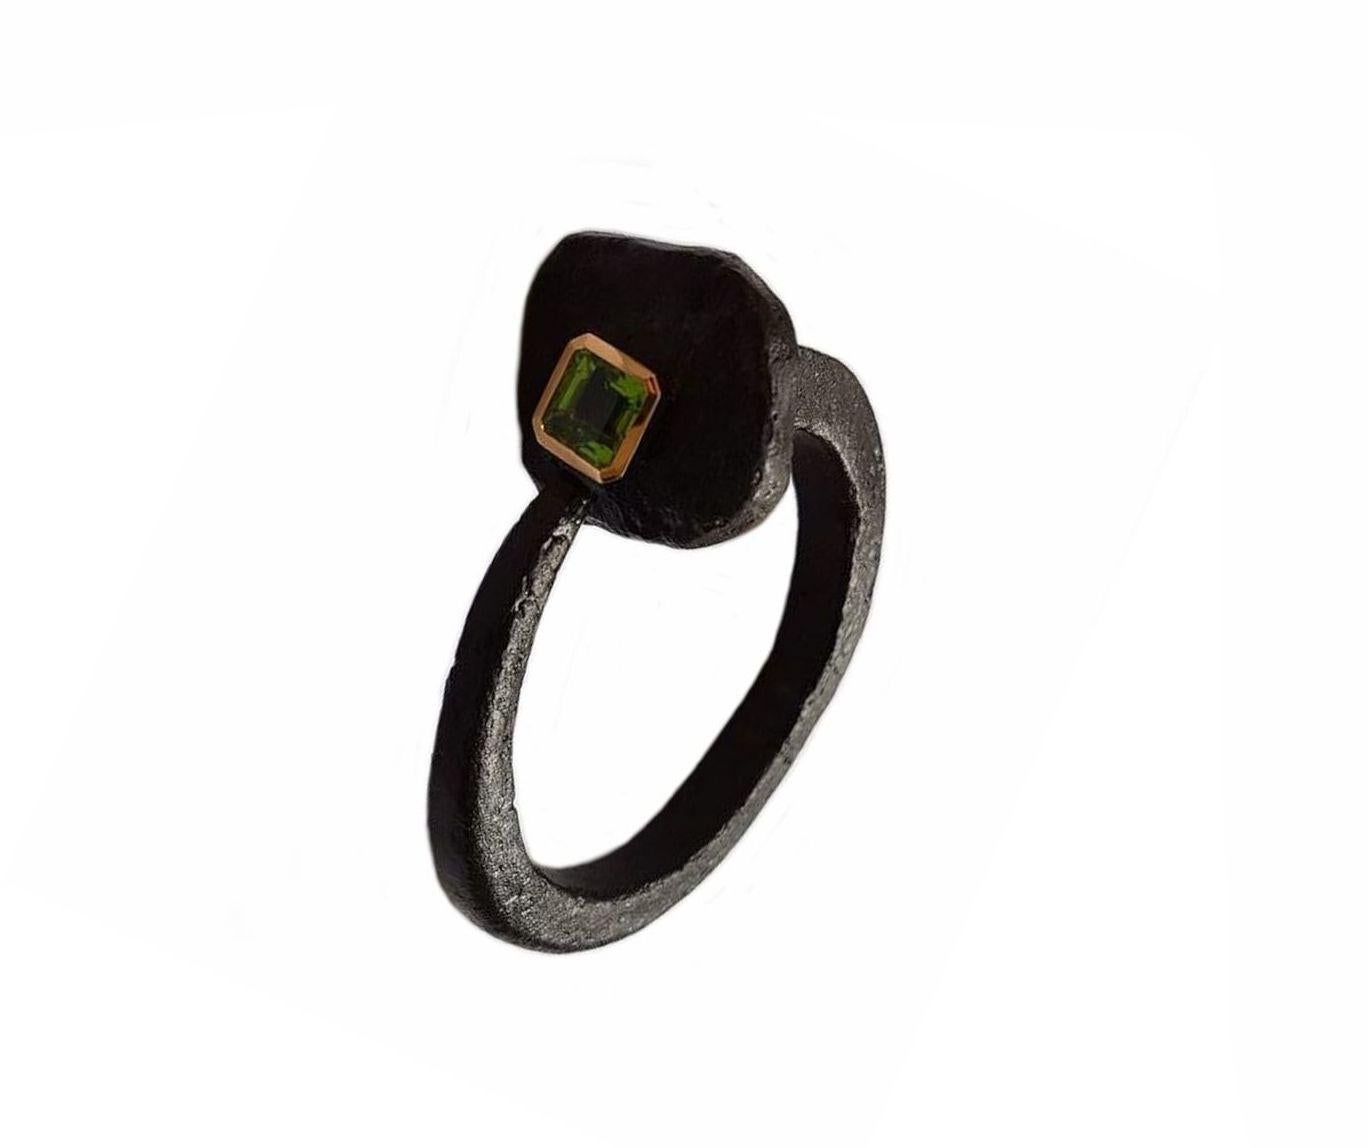 This unusual bangle - designed by Guenter  Krauss - is made of an old iron ship nail. An exquisite 5.45 carat peridot set in 18 carat gold adorns the head of the nail.
A vanguard piece of jewelry for the sophisticated lady!
Wear daytime or with